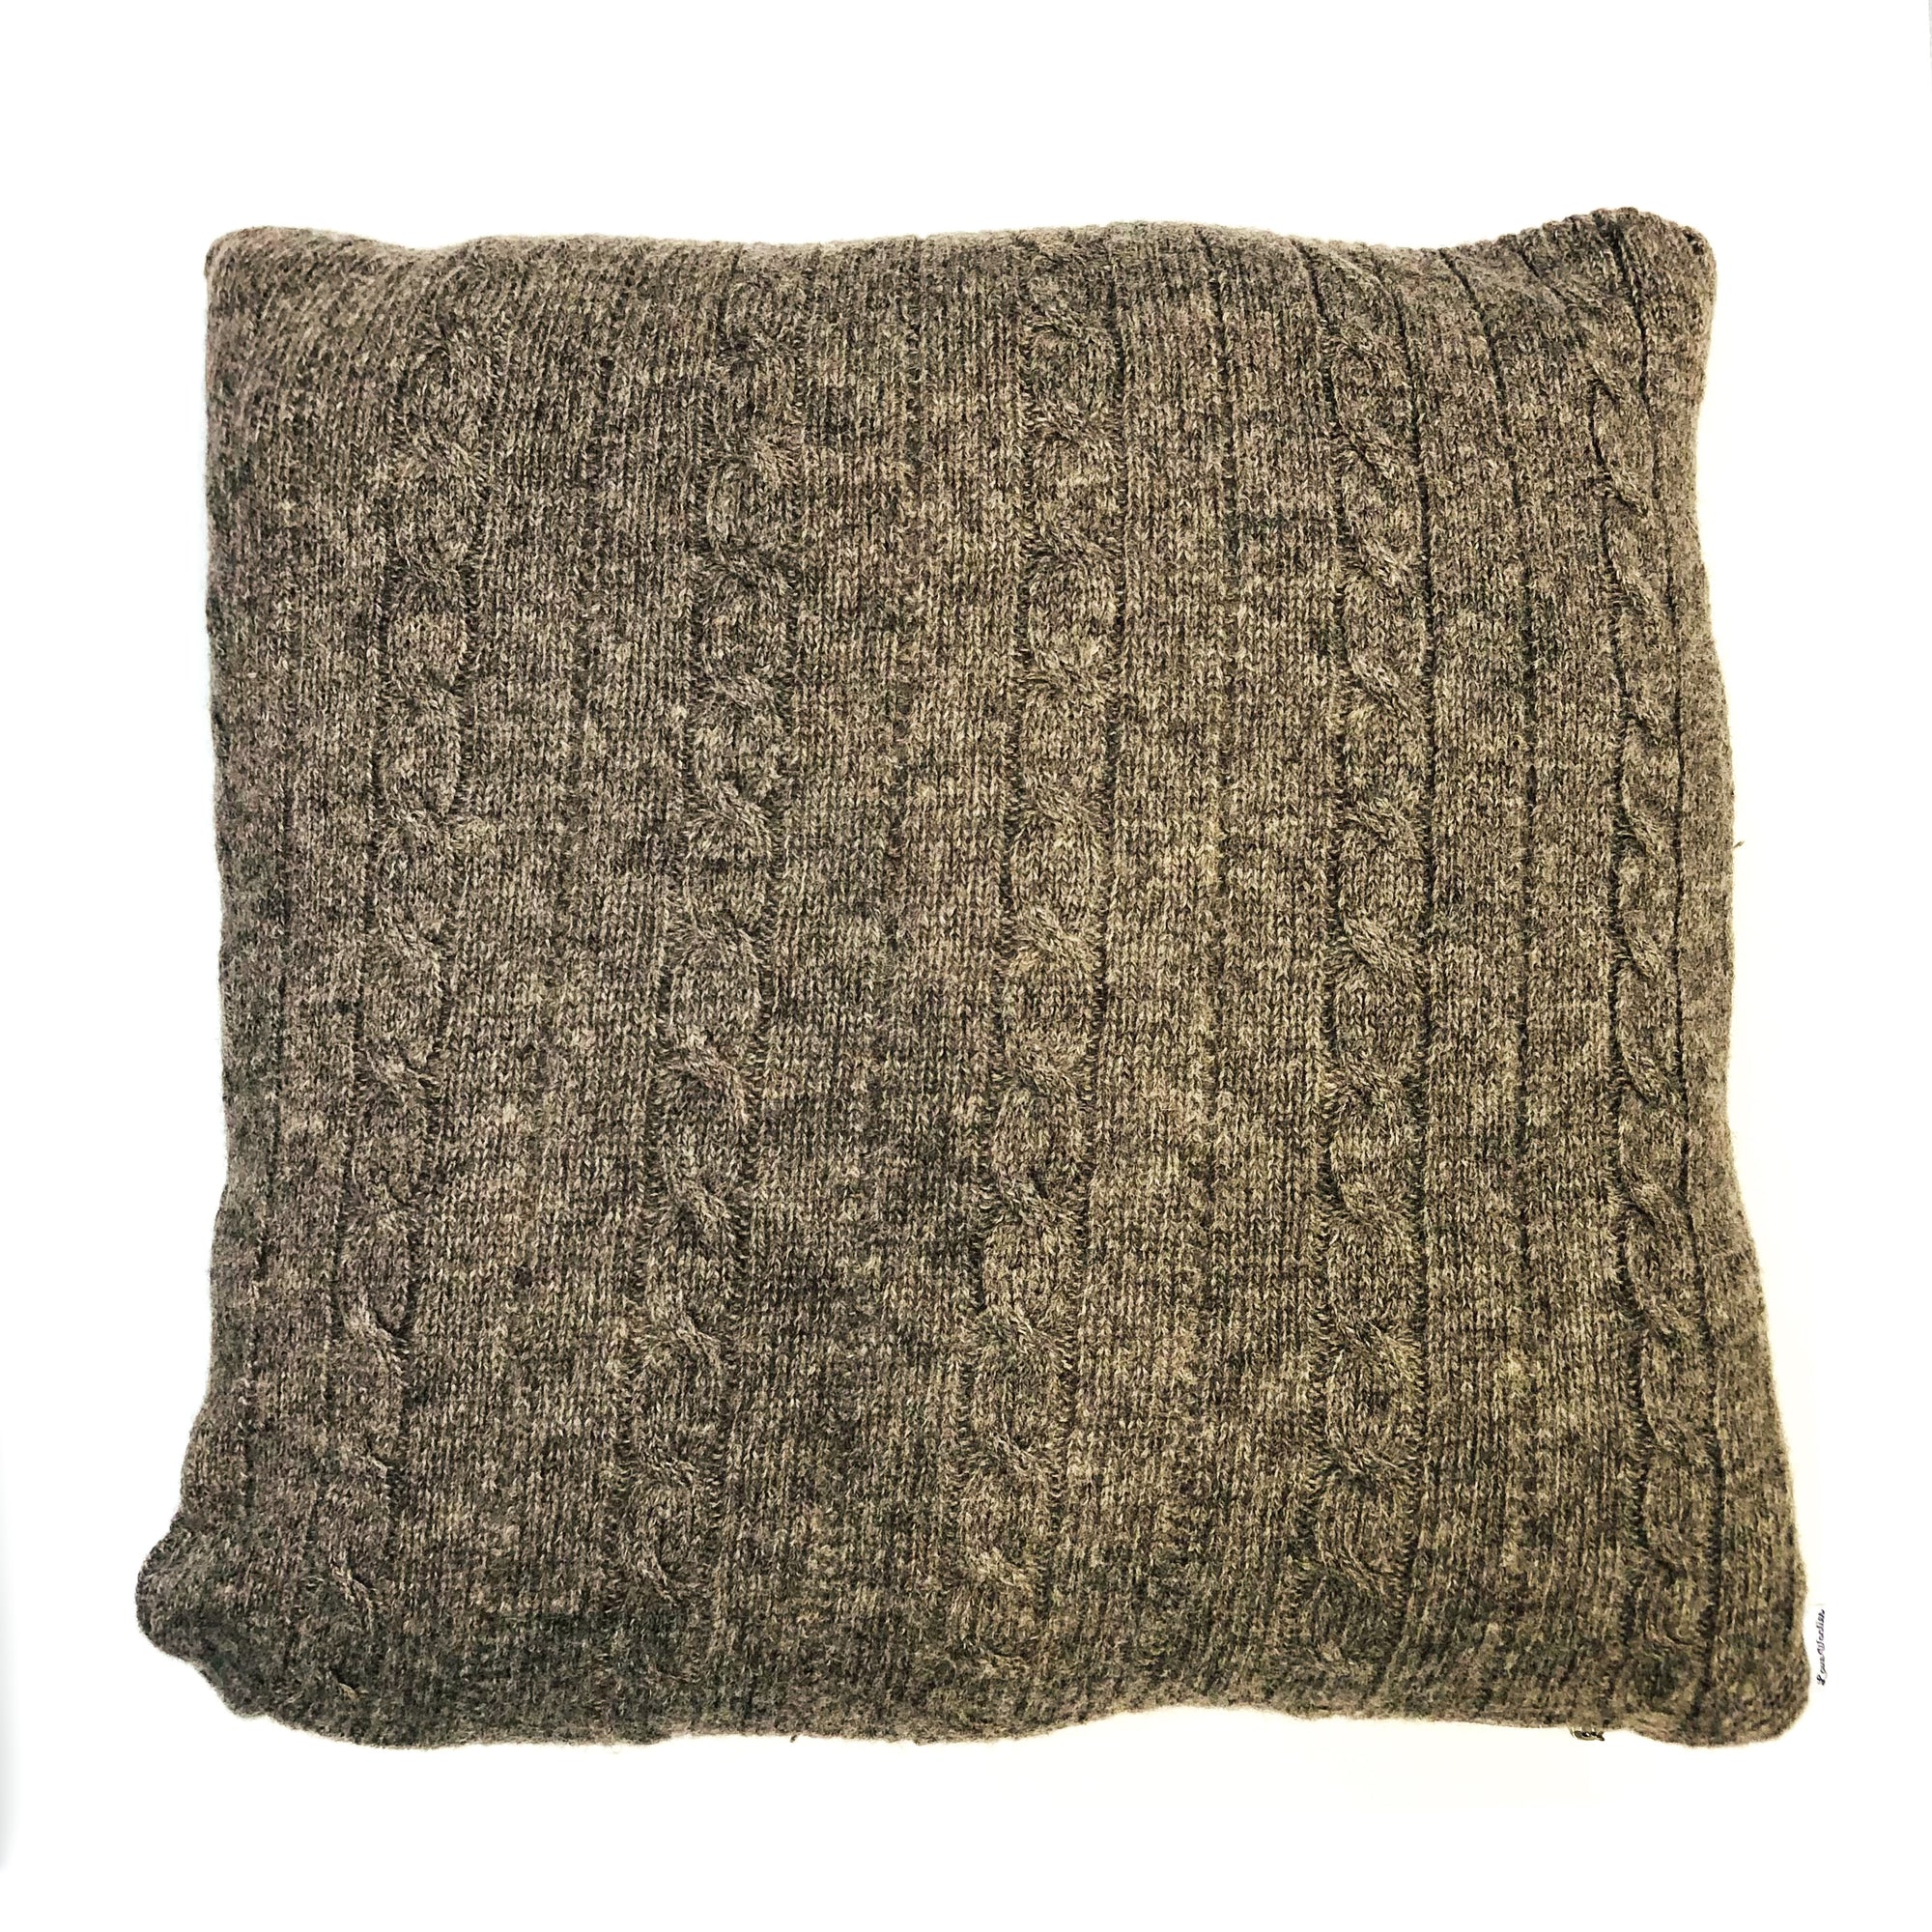 18 x 18 Light Brown Cable Knit Pillow cover